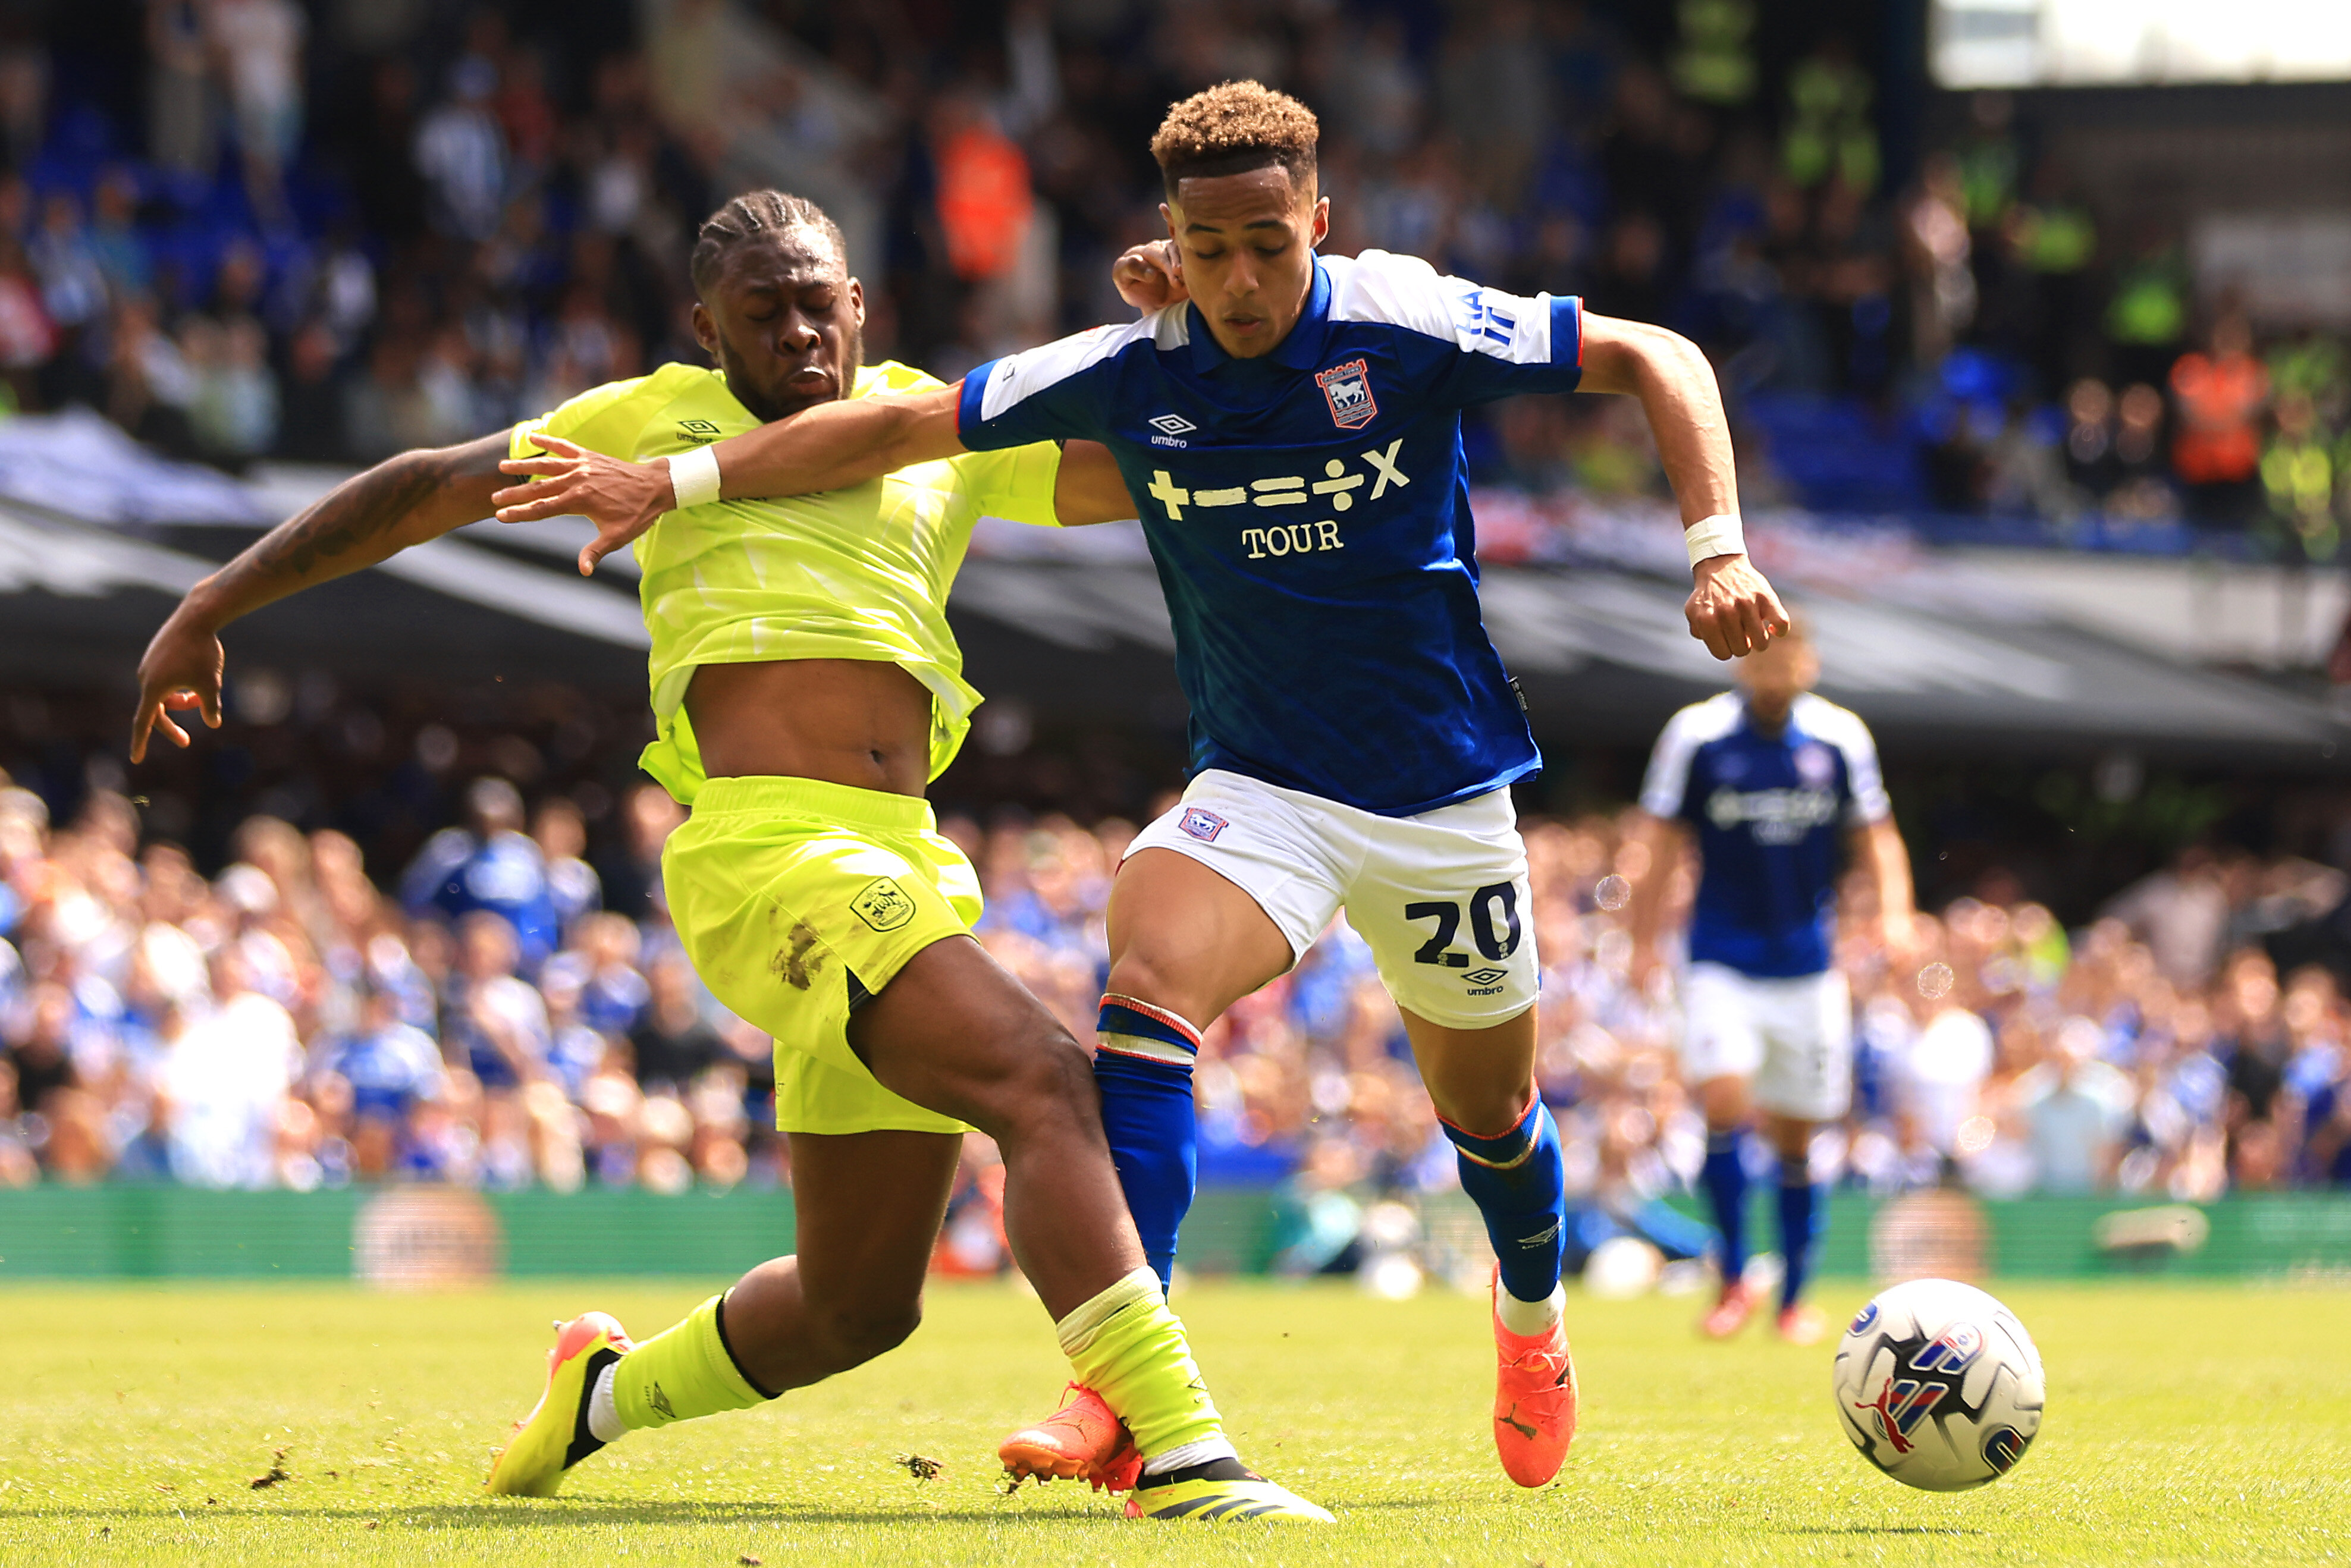 Chelsea youngster Omari Hutchinson wants to return to Ipswich Town this summer